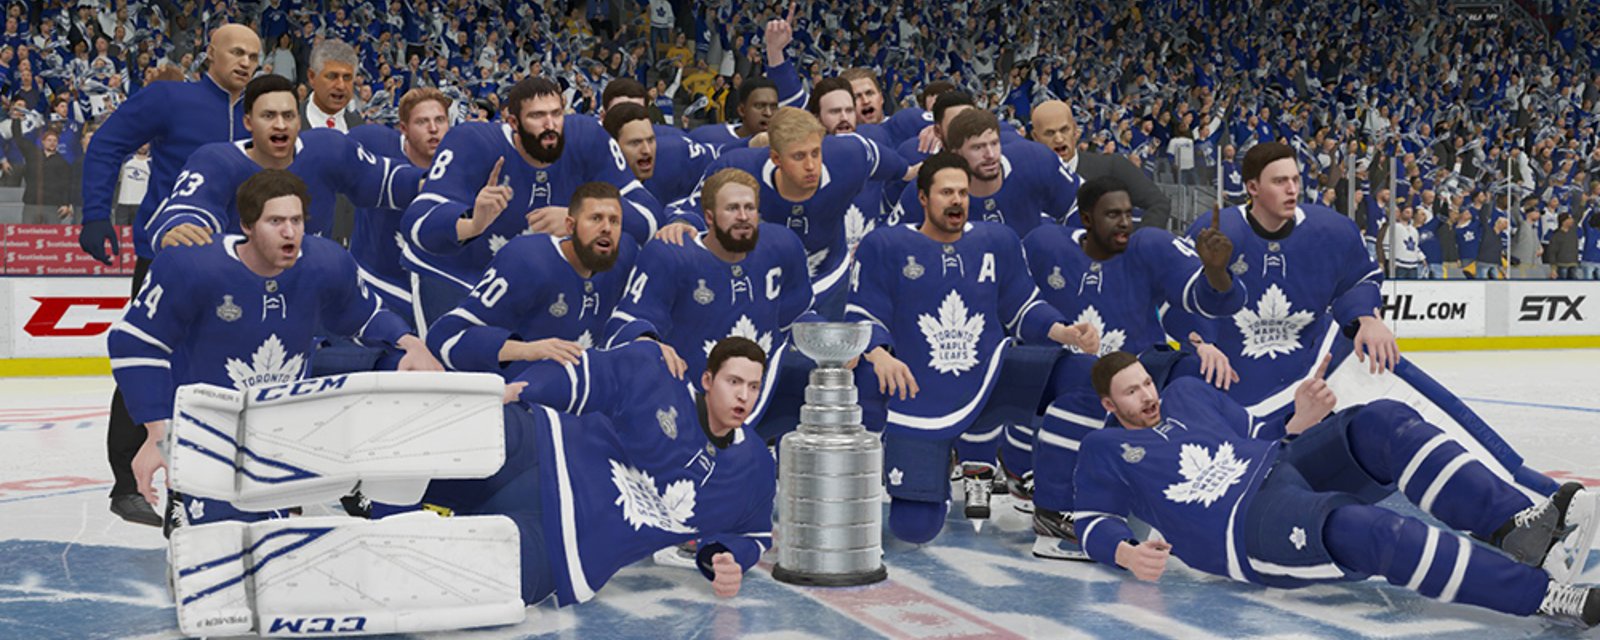 Oddsmakers reveal likelihood of Toronto Maple Leafs lifting the Stanley Cup 